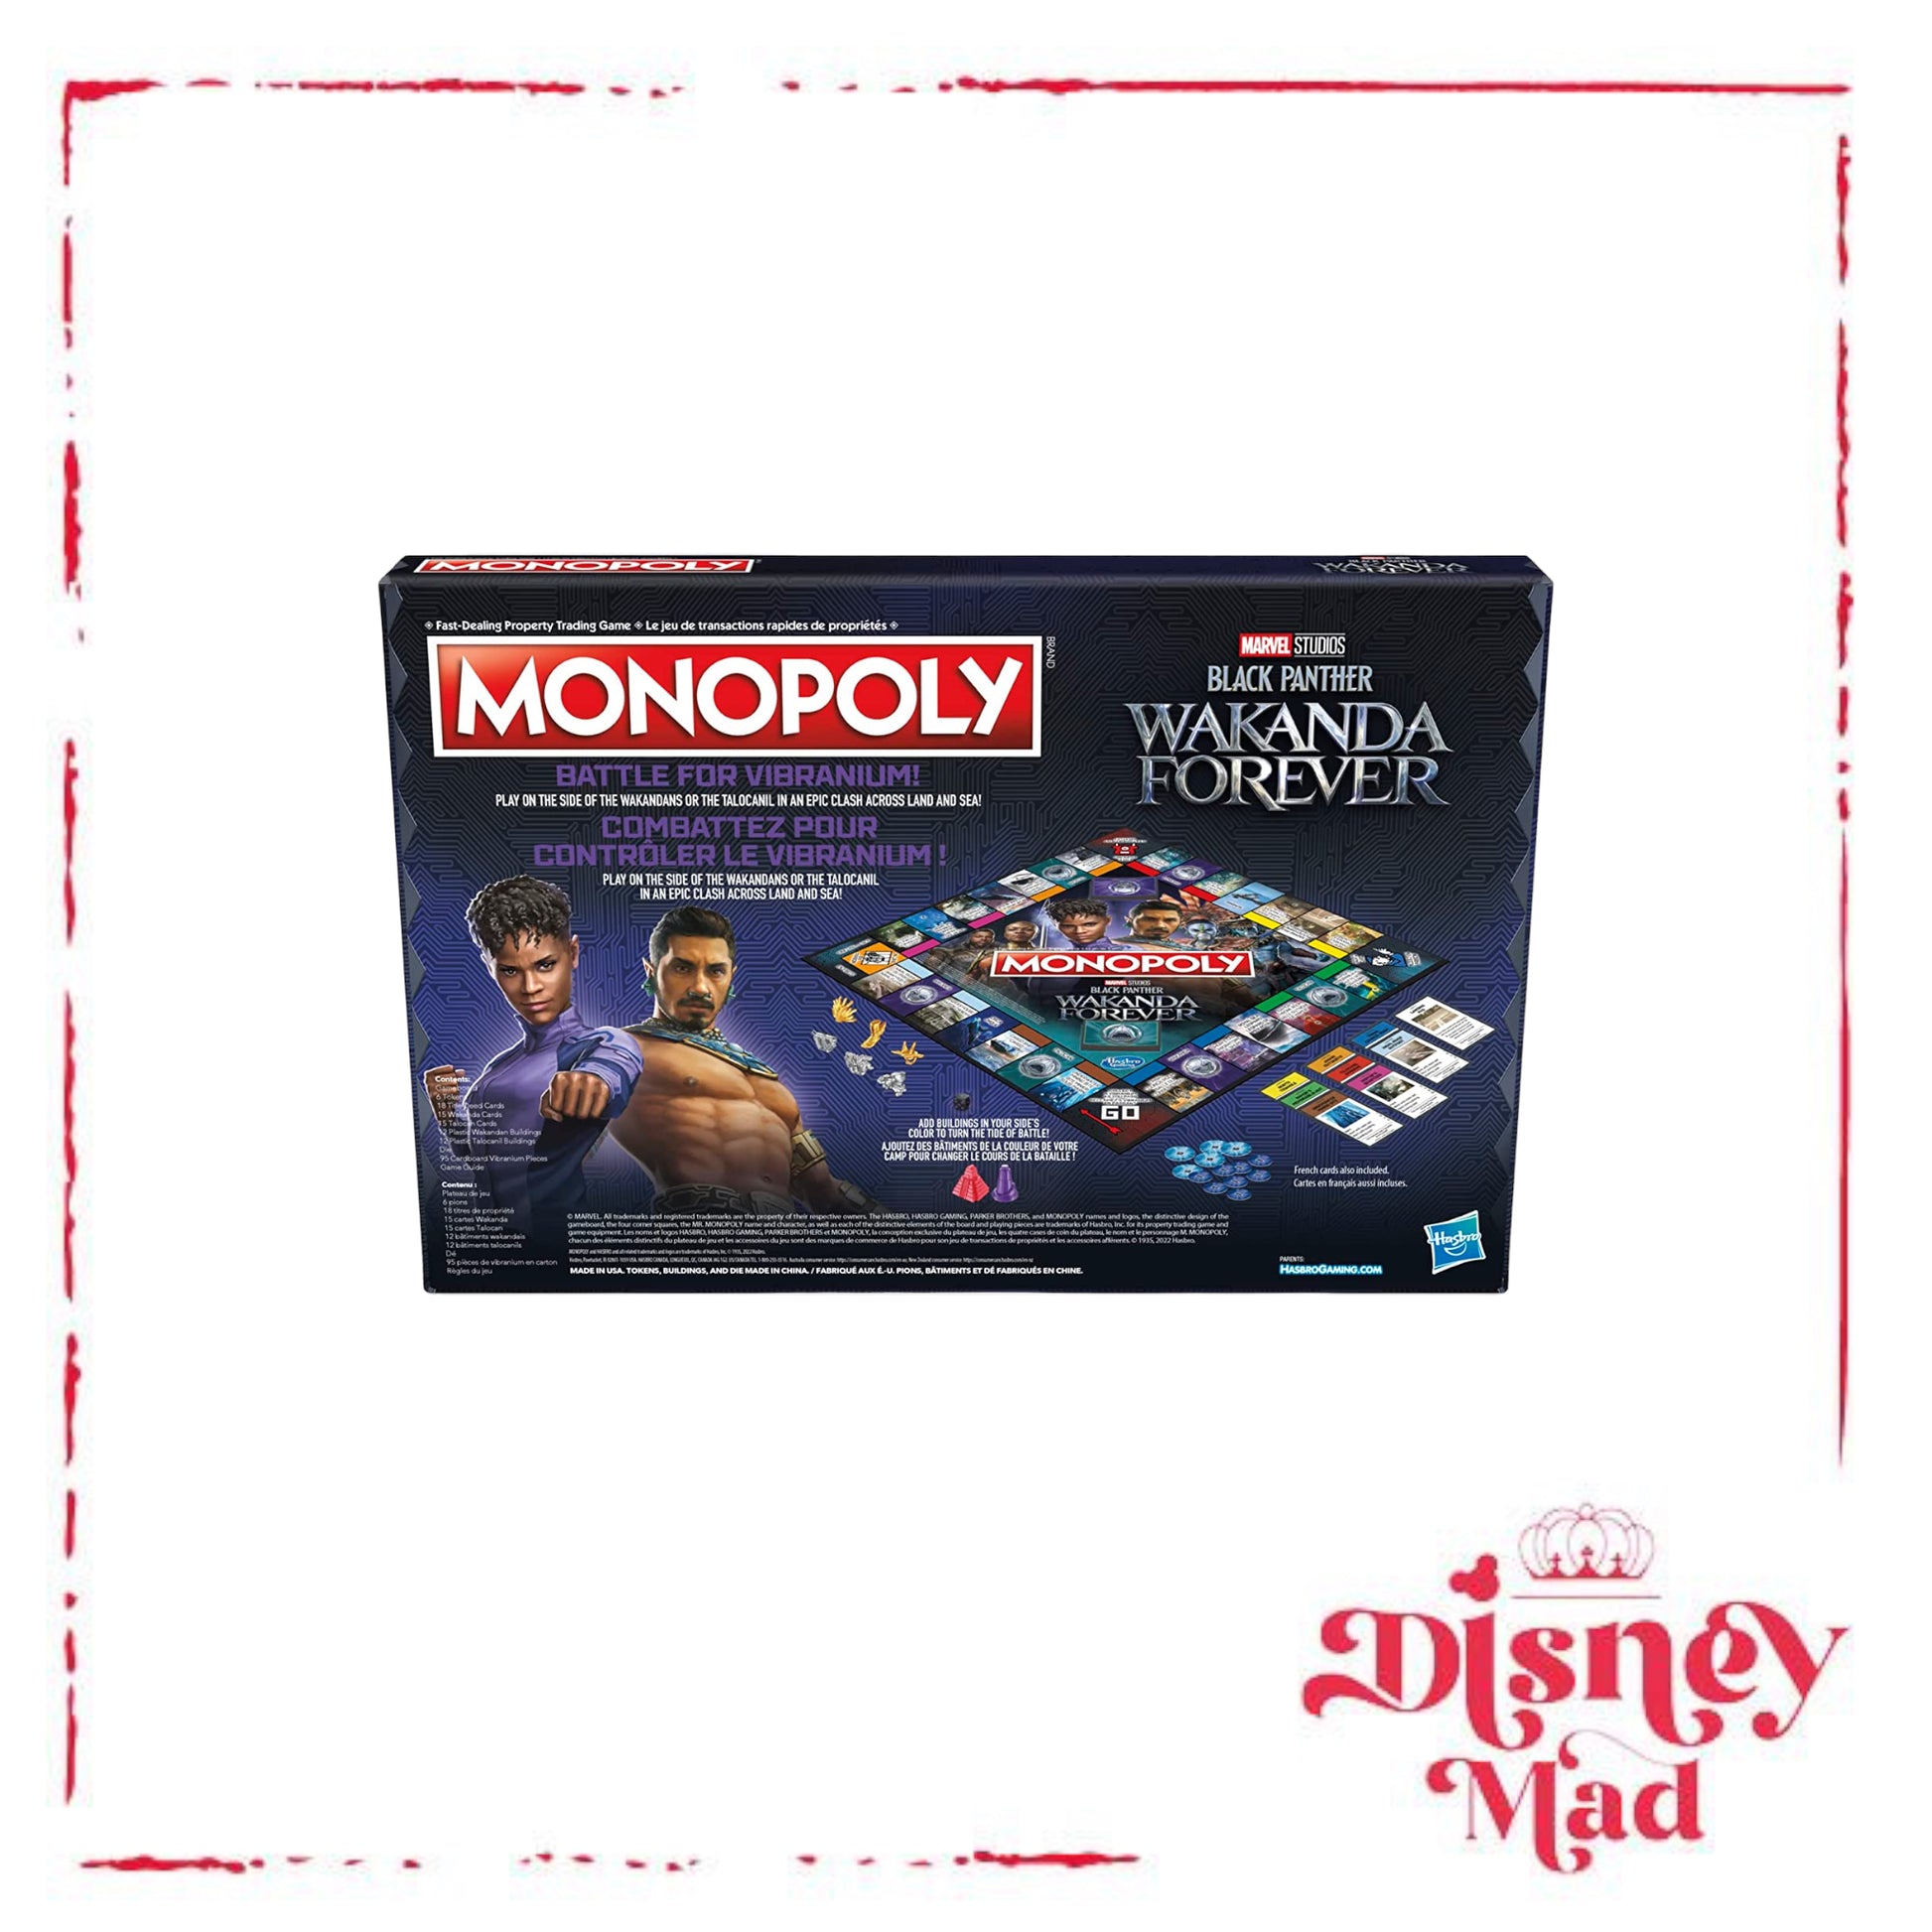 Monopoly Black Panther Wakanda Forever – Game On Games